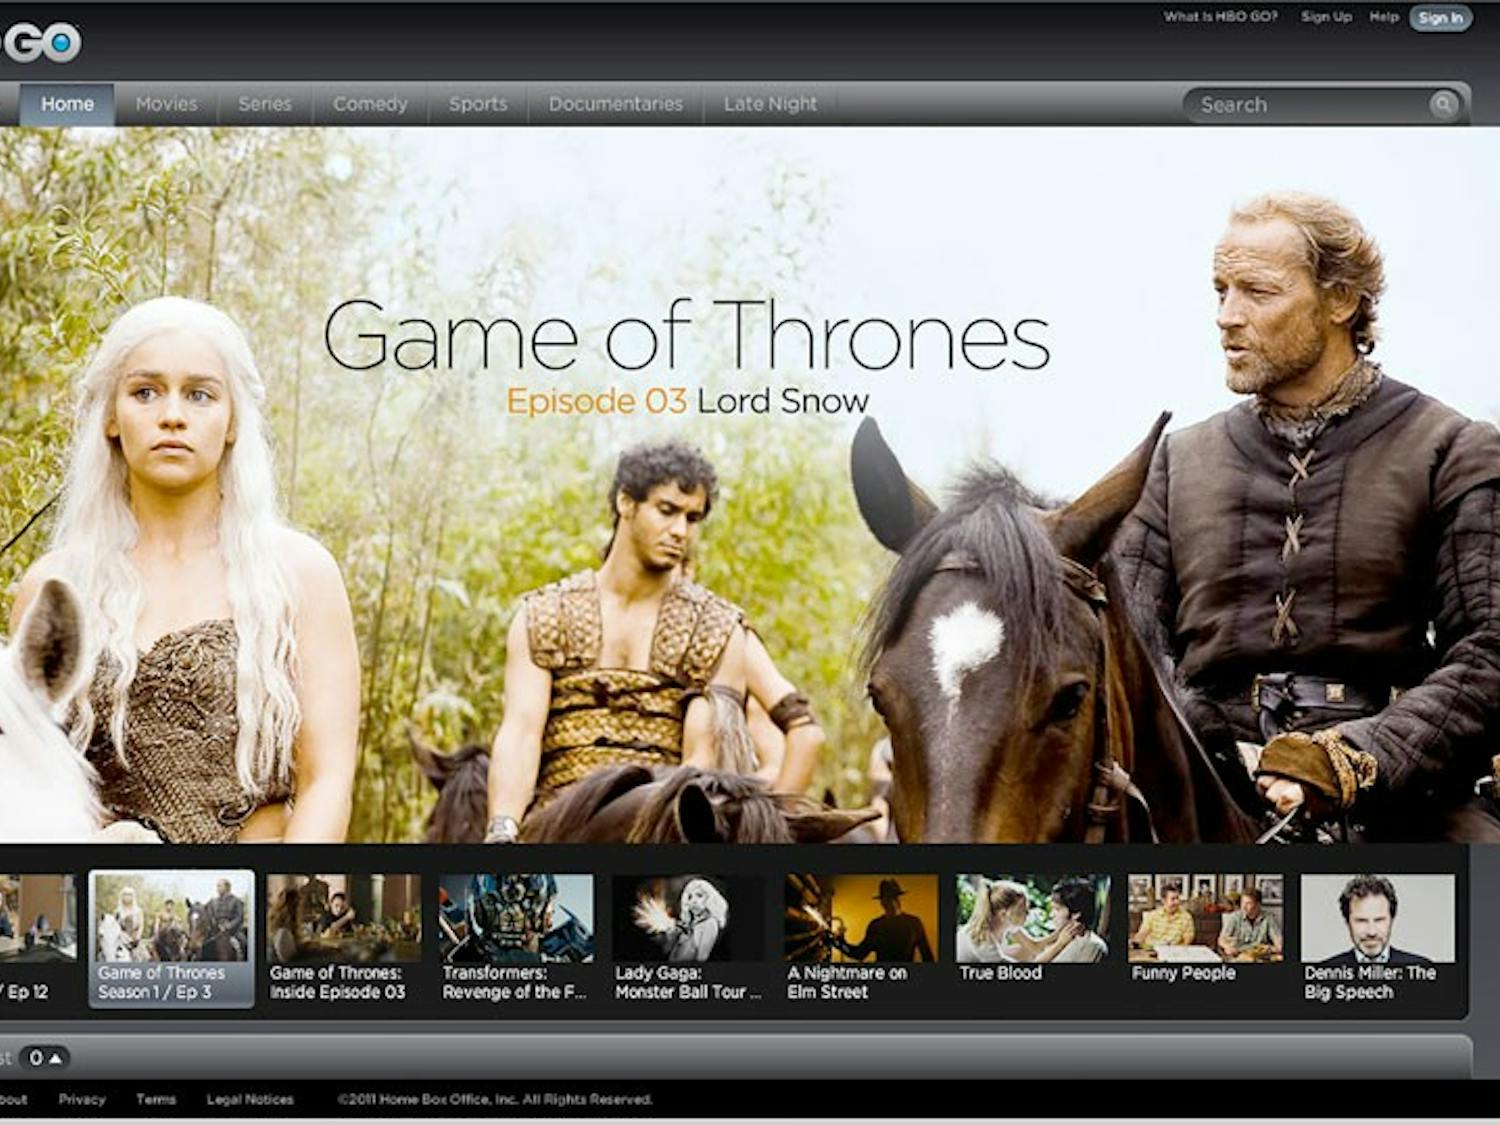 Game of Thrones premiere on April 12 at 9 p.m. isn’t something students living on campus will need to torrent or borrow from a friend now that HBO Go is included in student’s housing packages.